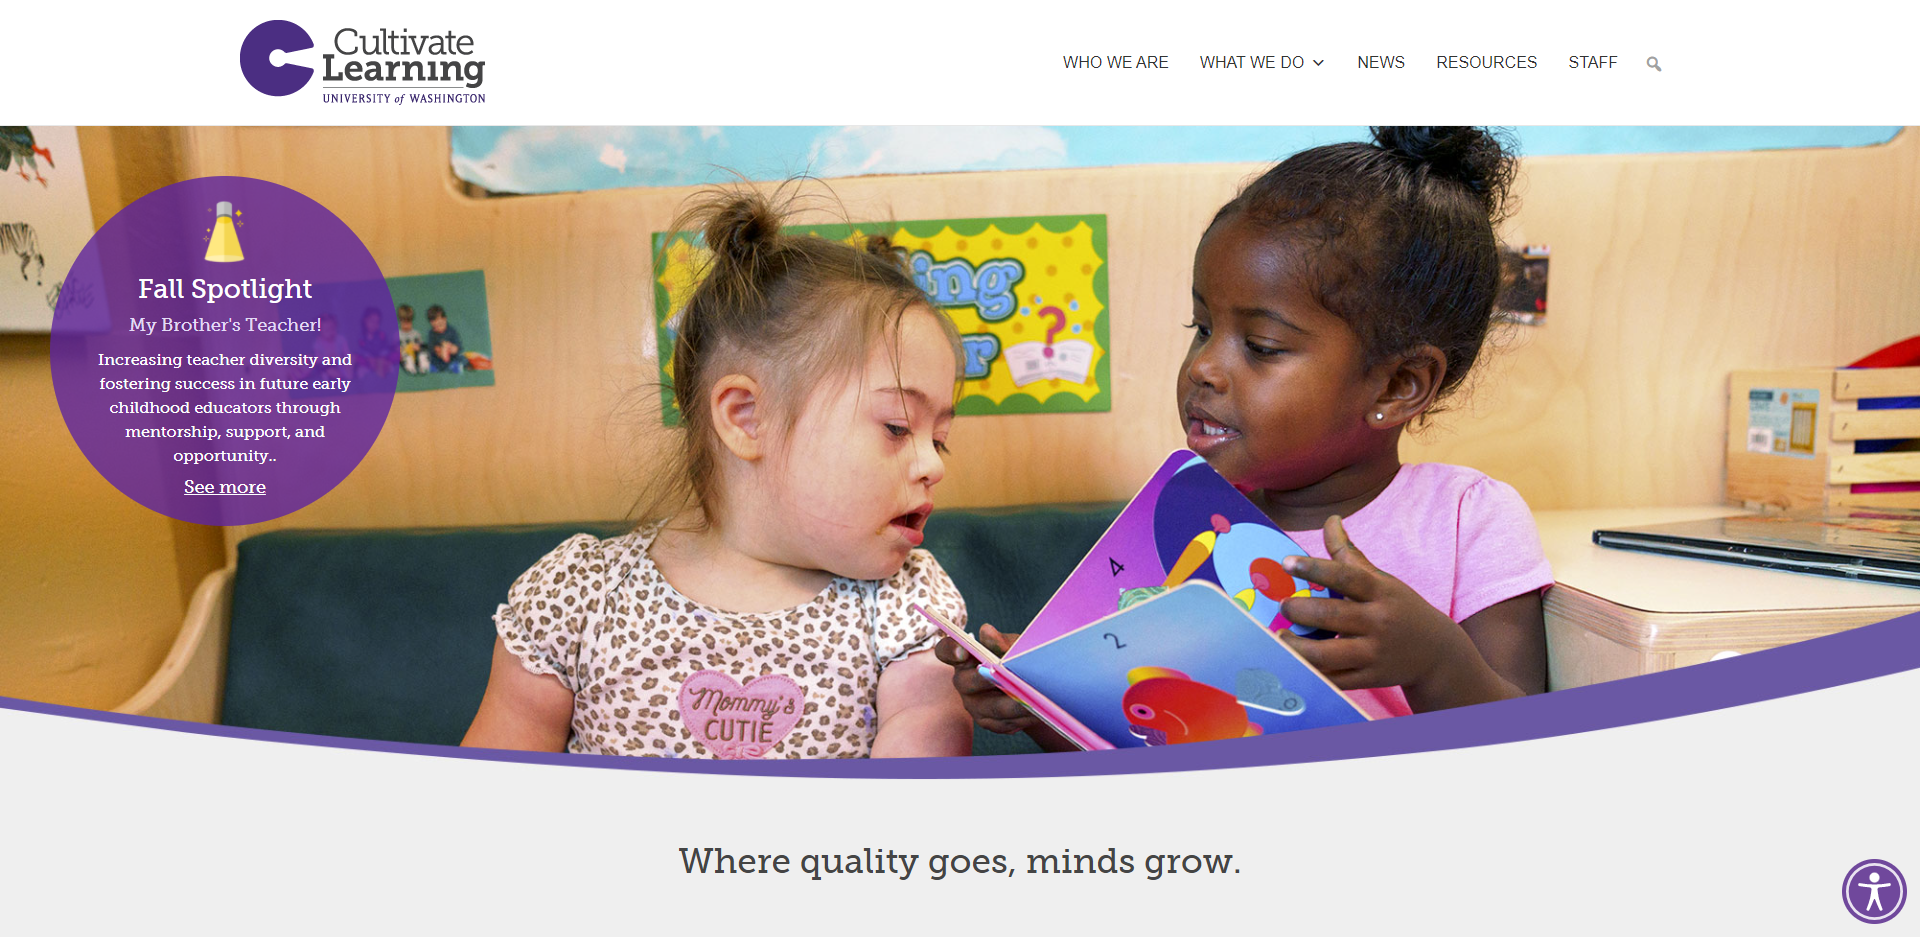 The University of Washington Cultivate Learning website.